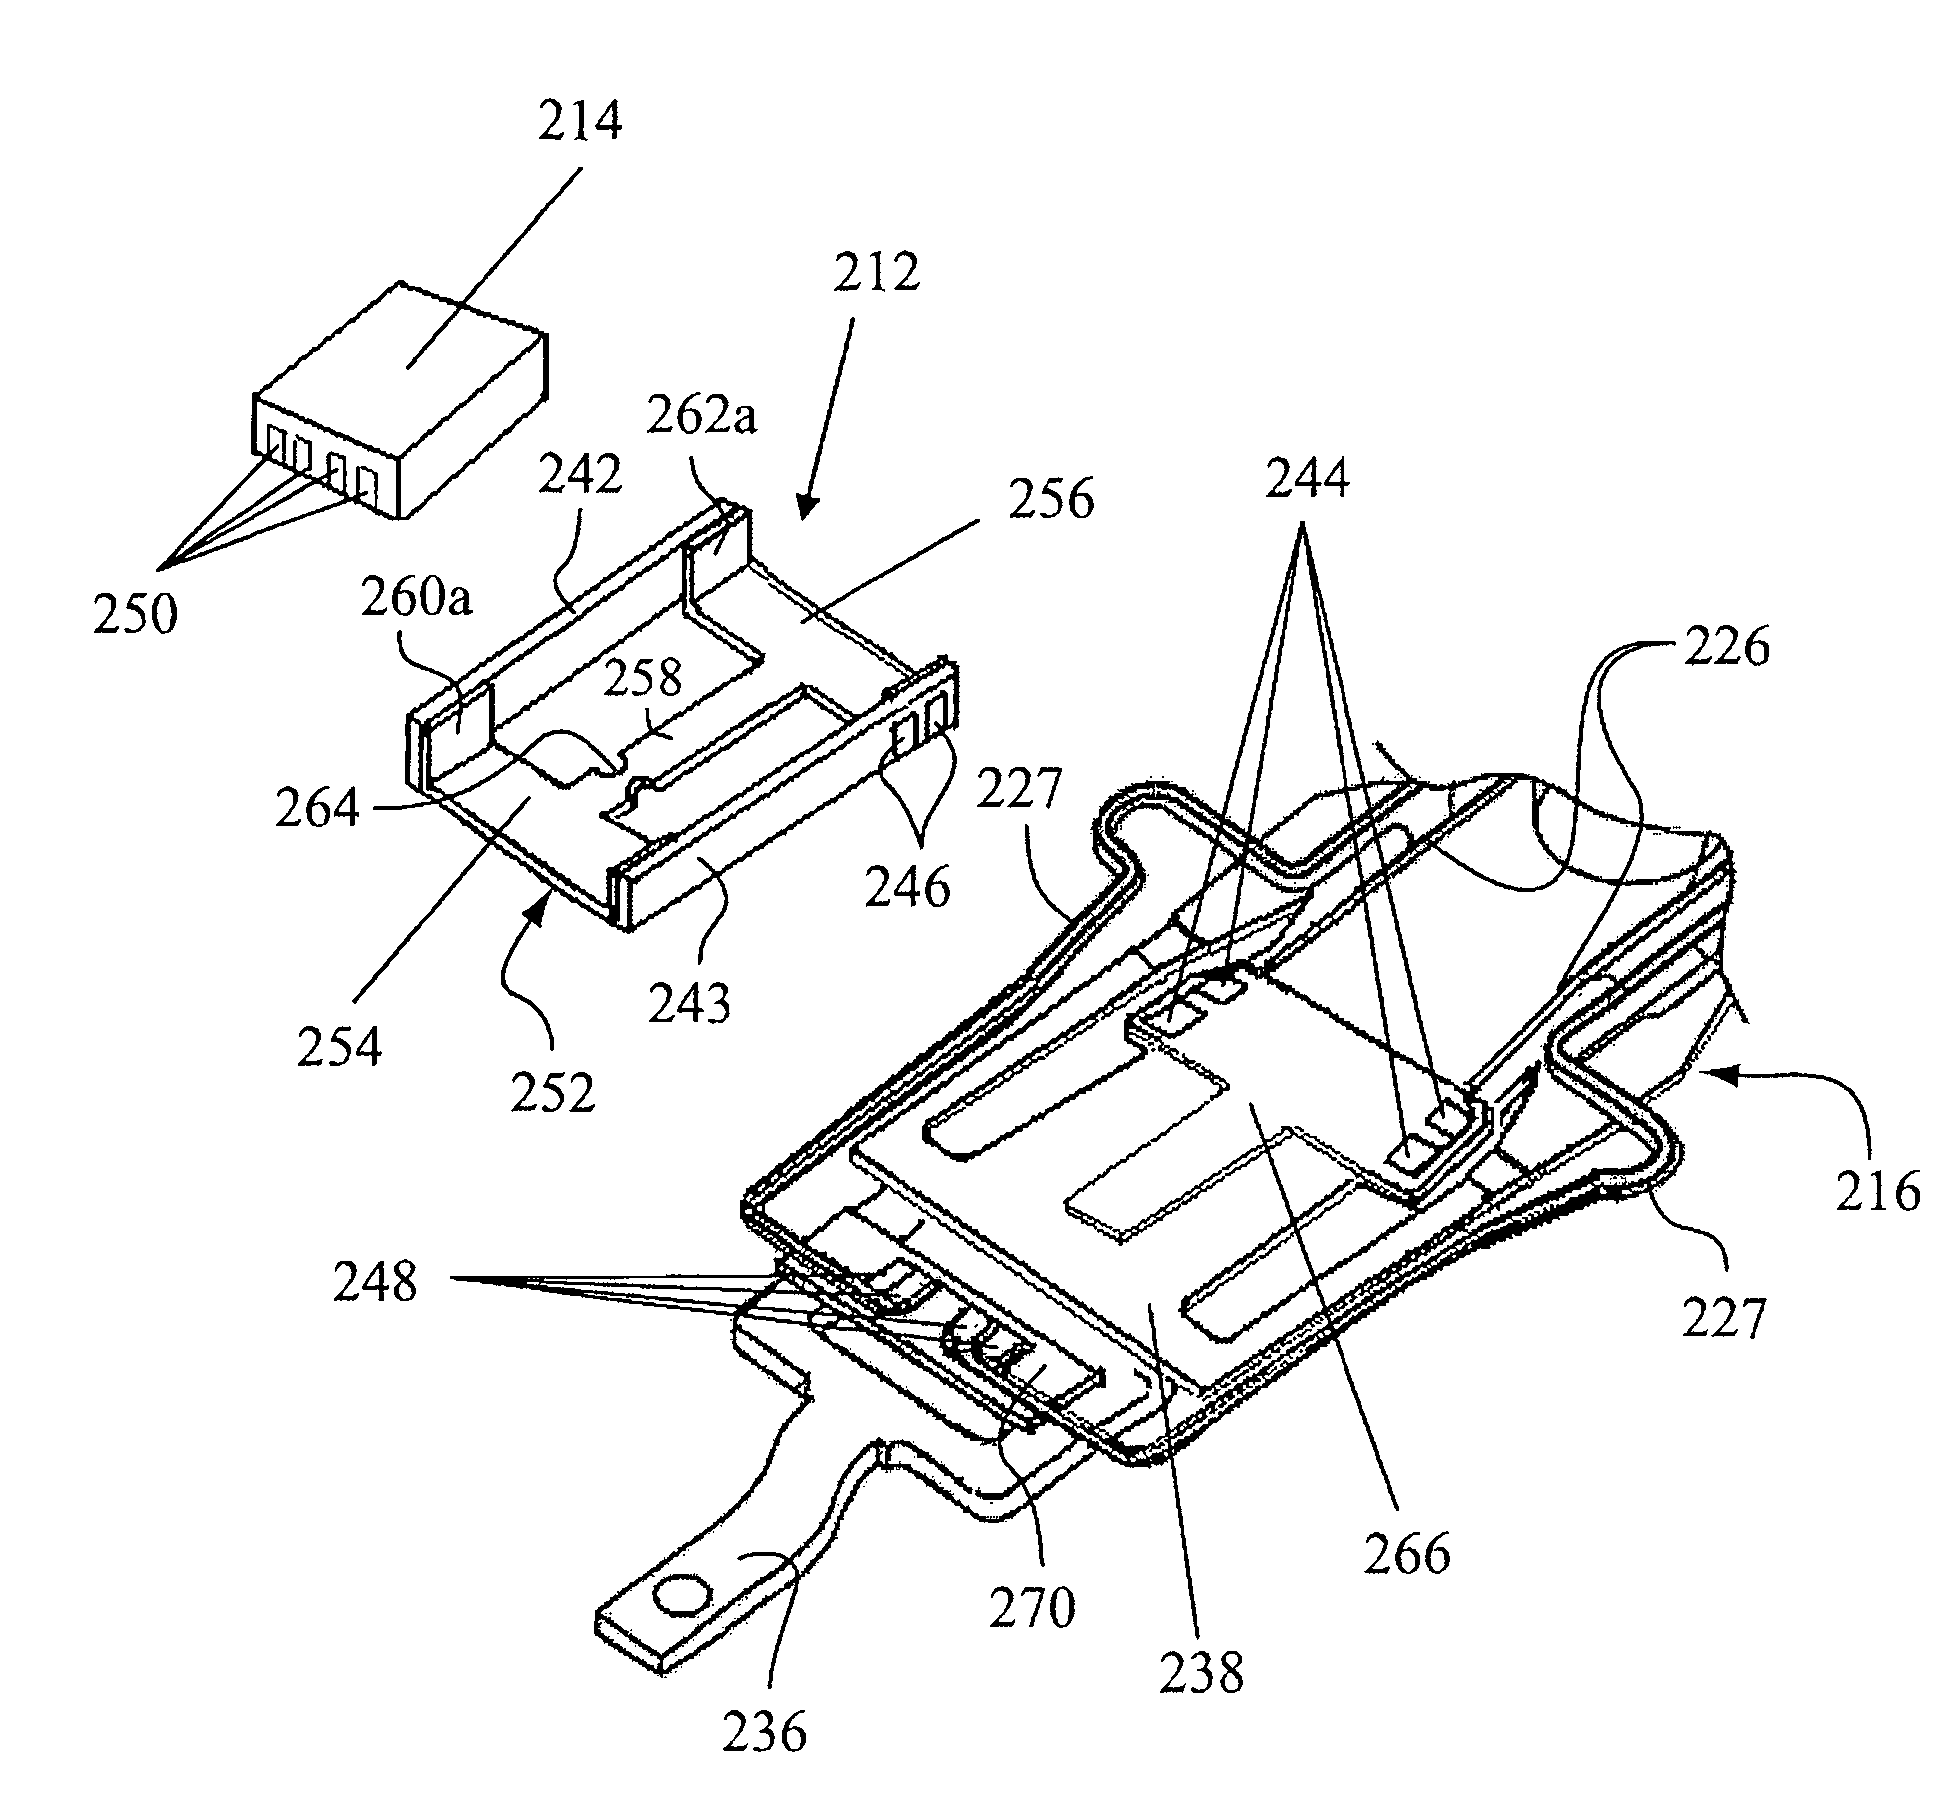 Miro-actuator, head gimbal assembly, and disk drive unit with the same